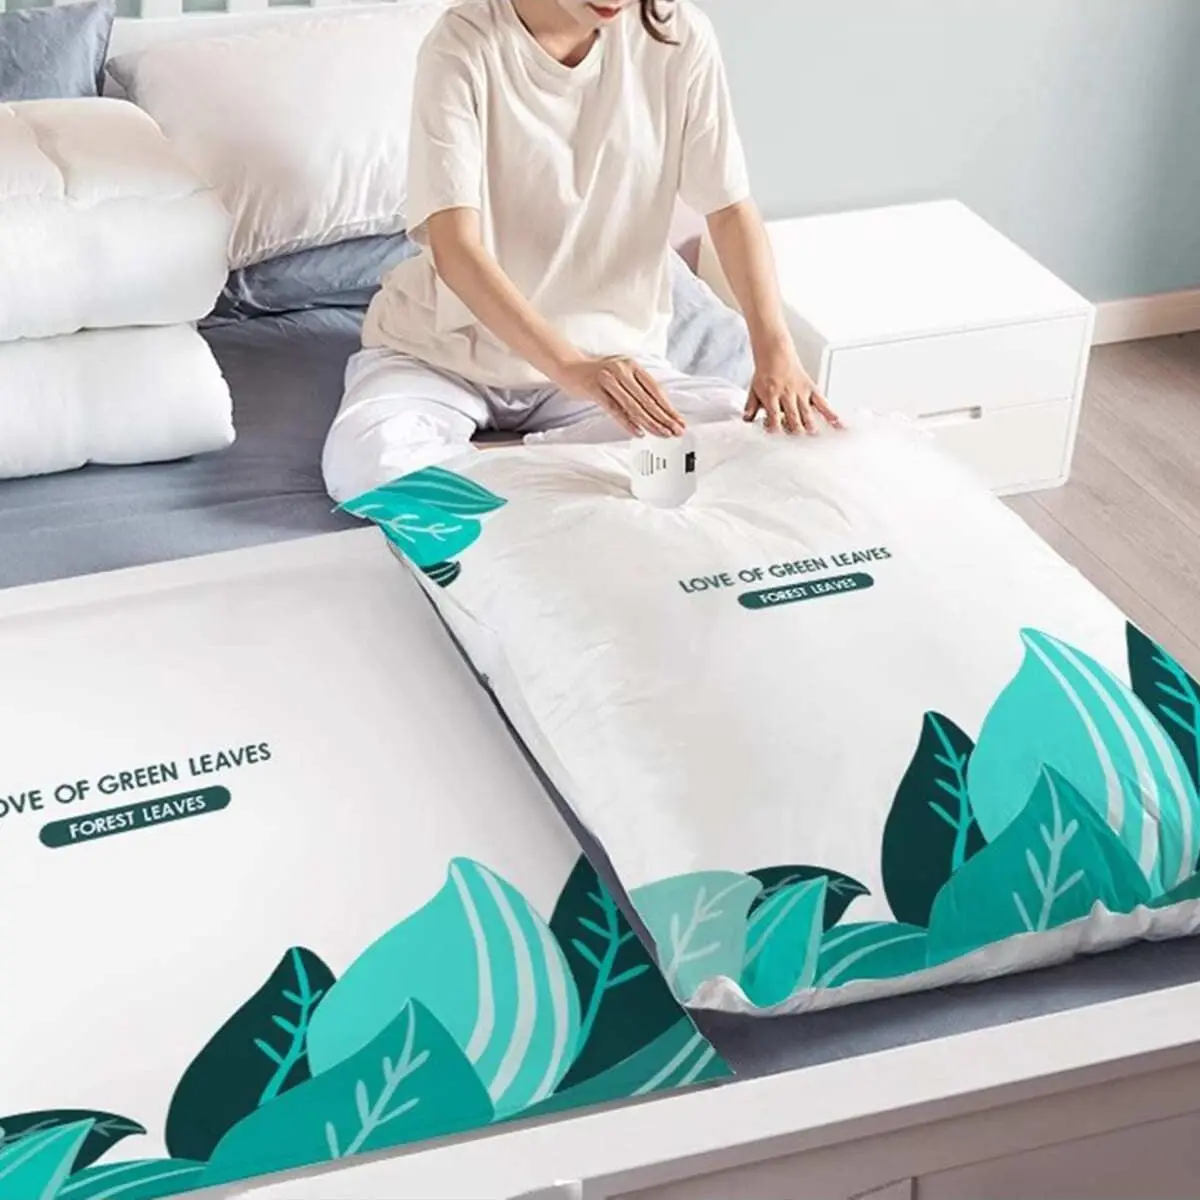 https://ae01.alicdn.com/kf/Sac1c8d67be7543e48e0d83c581a572bch/1PC-Reusable-Vacuum-Storage-Bag-Travel-Clothes-Blankets-Comforters-Compression-Space-Saving-and-Special-for-Hand.jpg